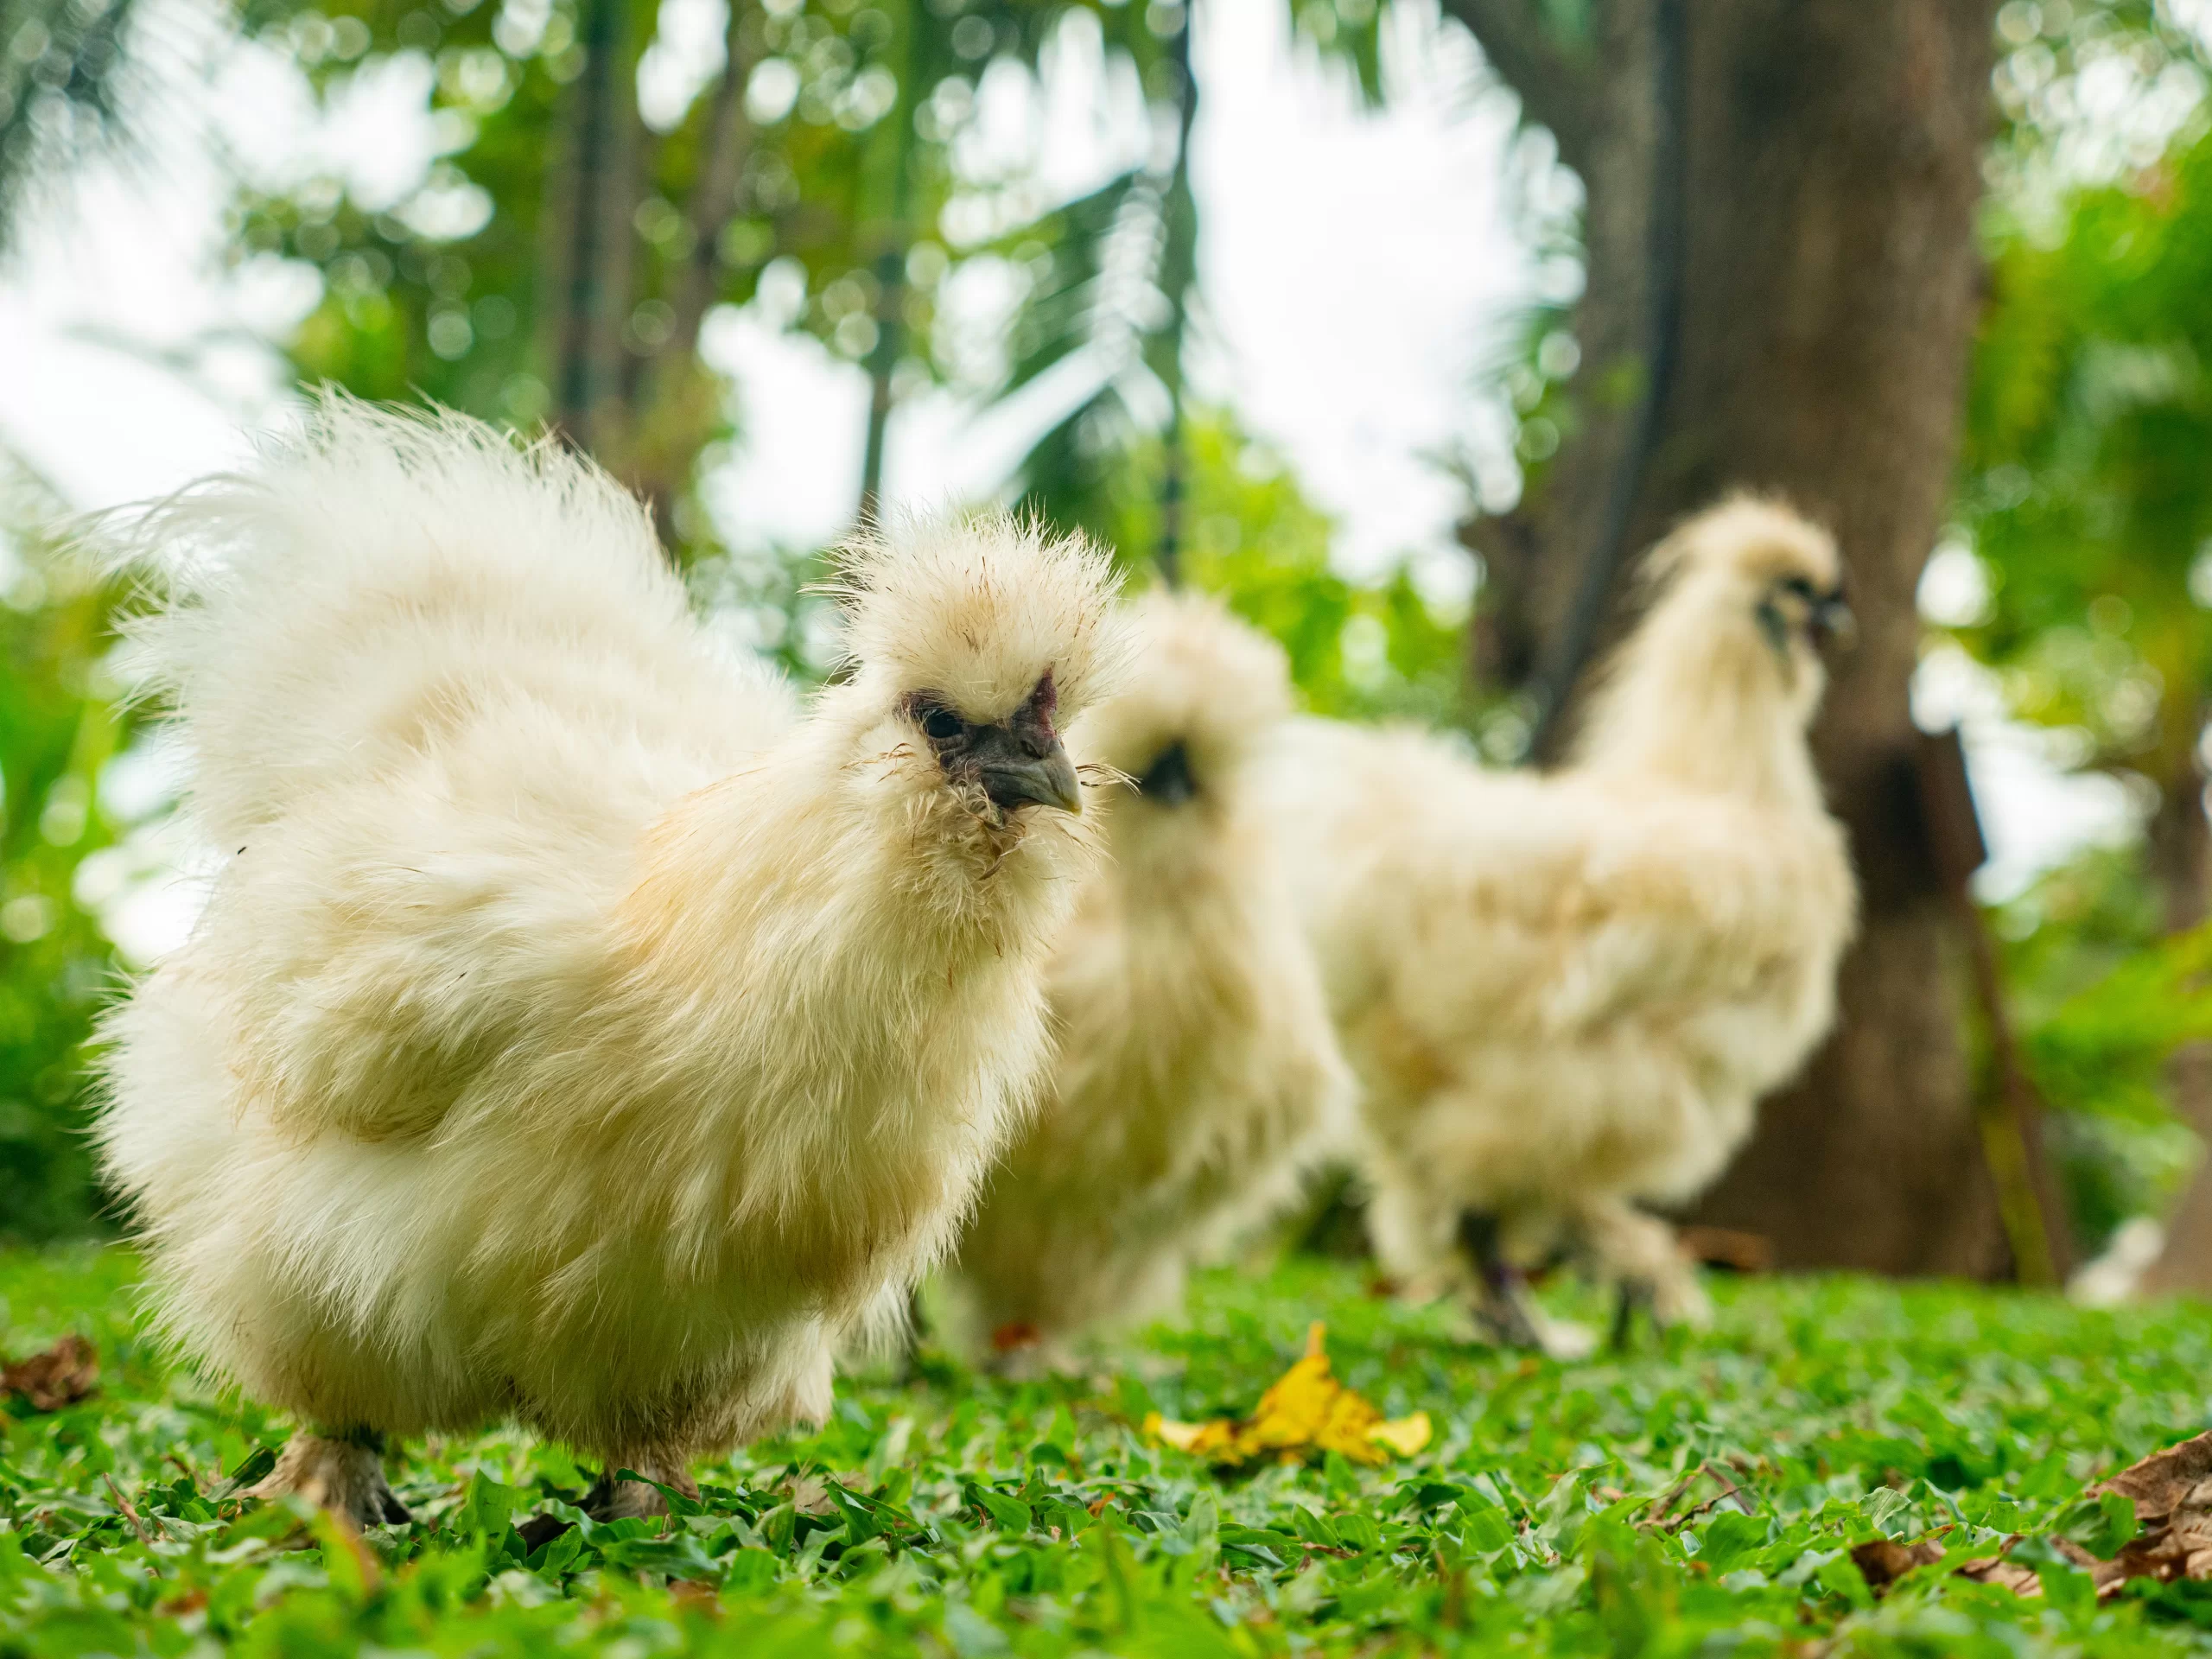 Ultimate Guide to Feeding Silkies: What Do They Eat